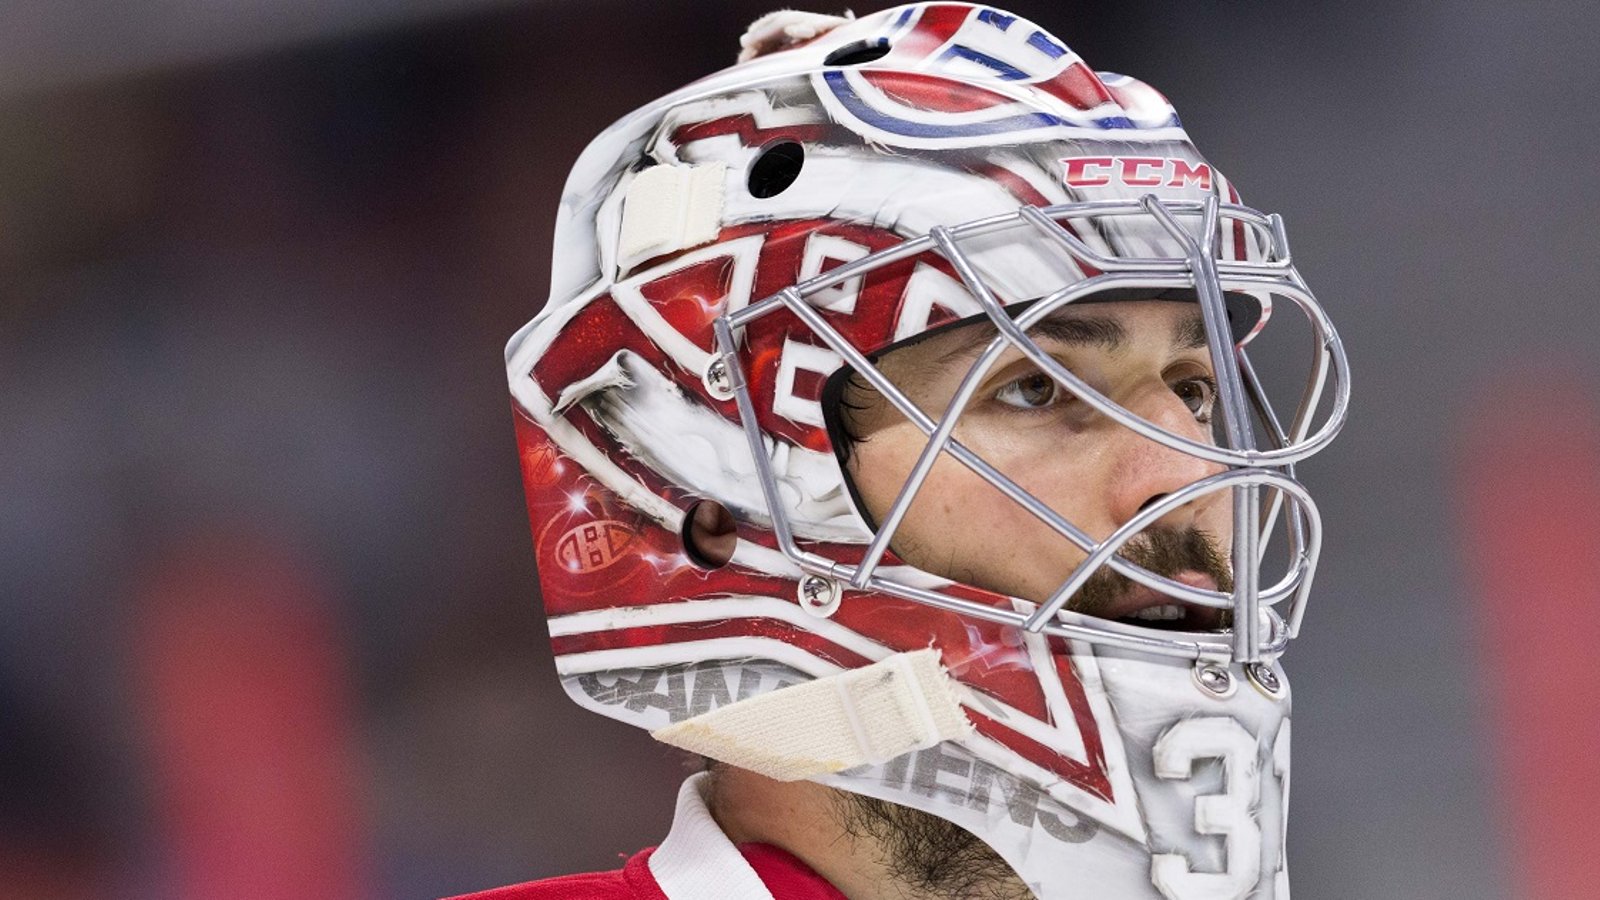 Carey Price leaves practice early on Monday morning due to an apparent injury.